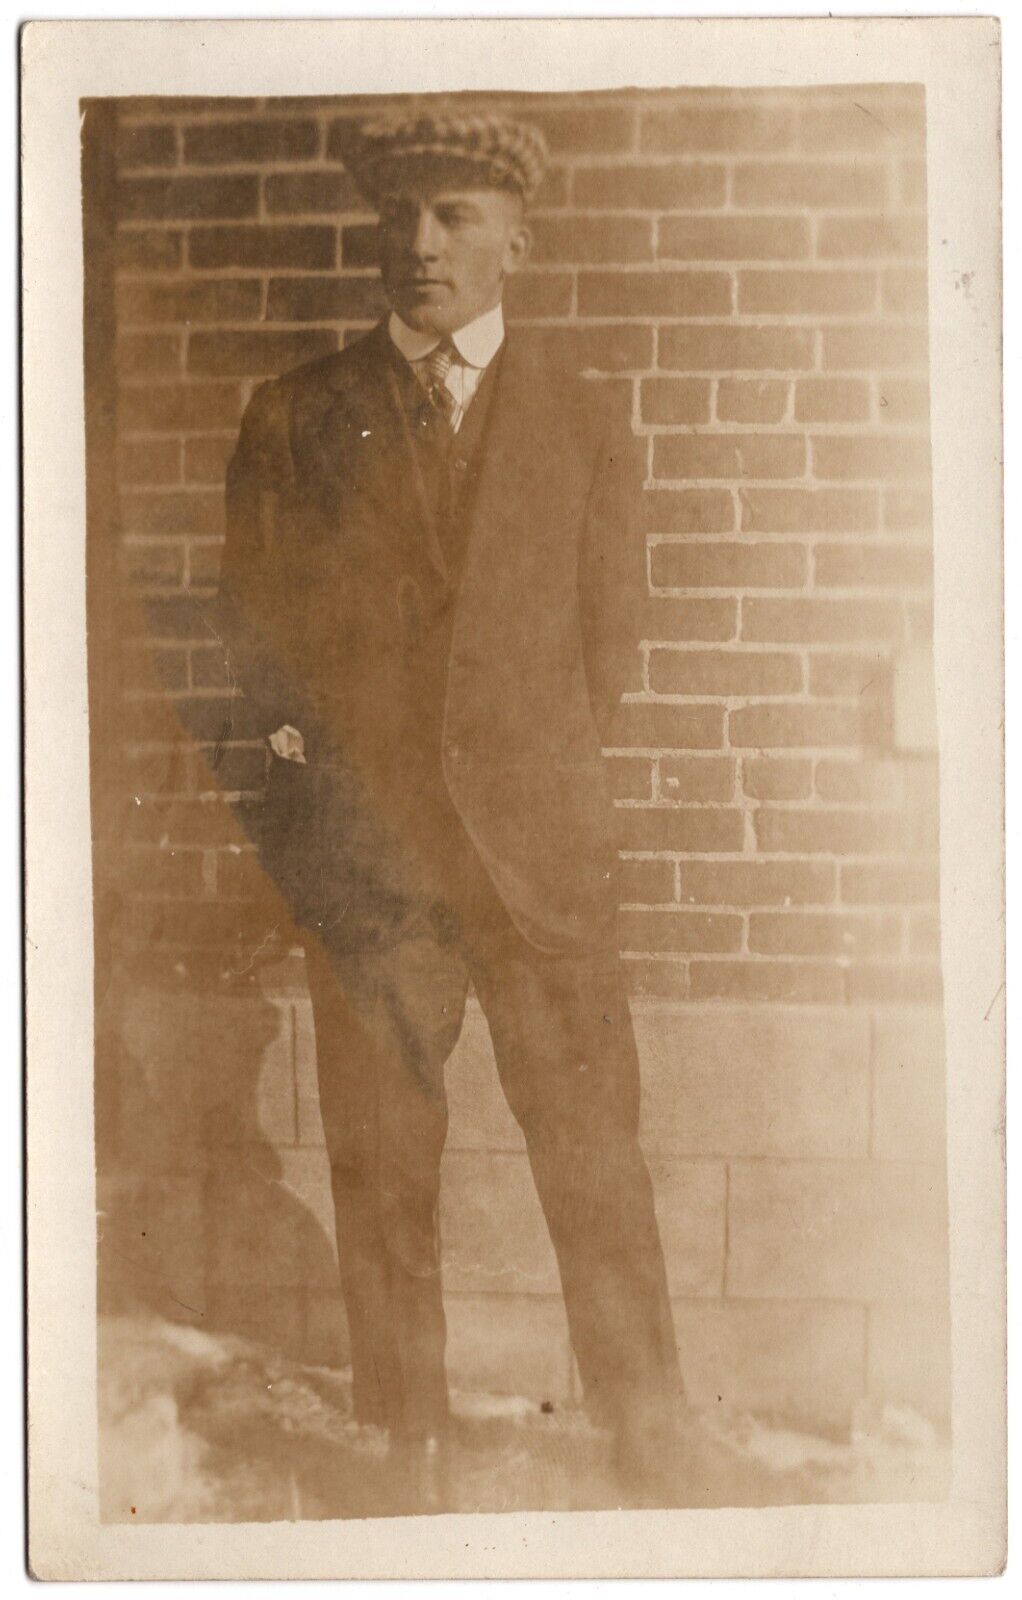 RPPC POSTCARD CIRCA 1920s HANDSOME YOUNG DAPPER MAN IN SUIT UNMARKED